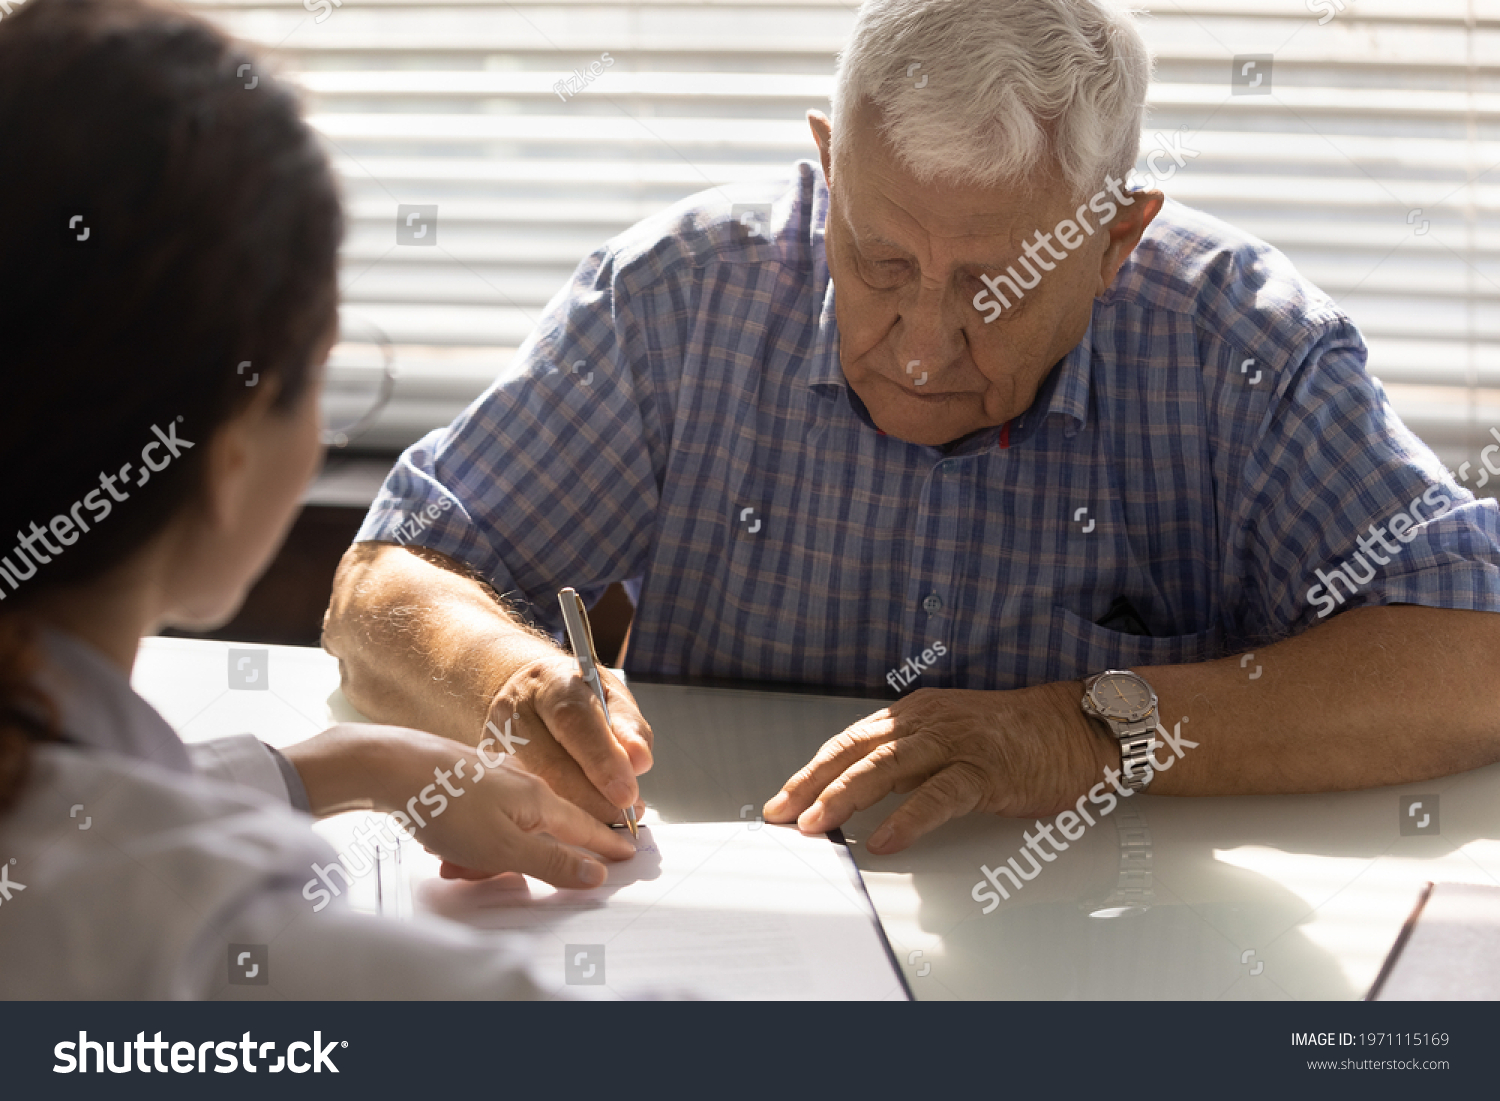 Sign here please. Sick elderly male affirming treatment plan by personal signature on appointment with doctor. Retired man patient sign contract on provision of health care service at physician office #1971115169